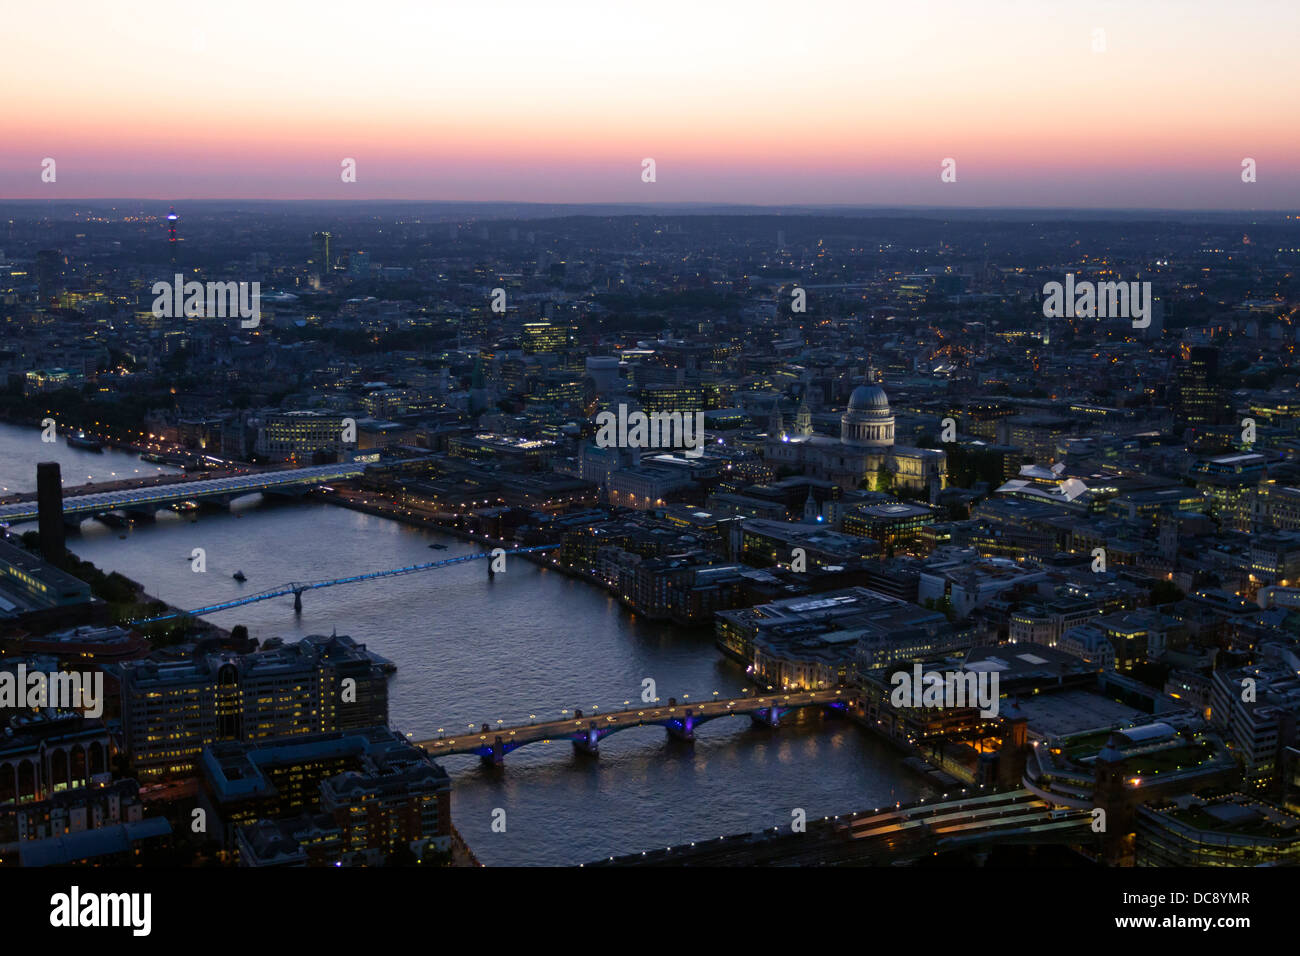 View from Top of Shard Skyscraper at Sunset - Southwark - London Stock Photo